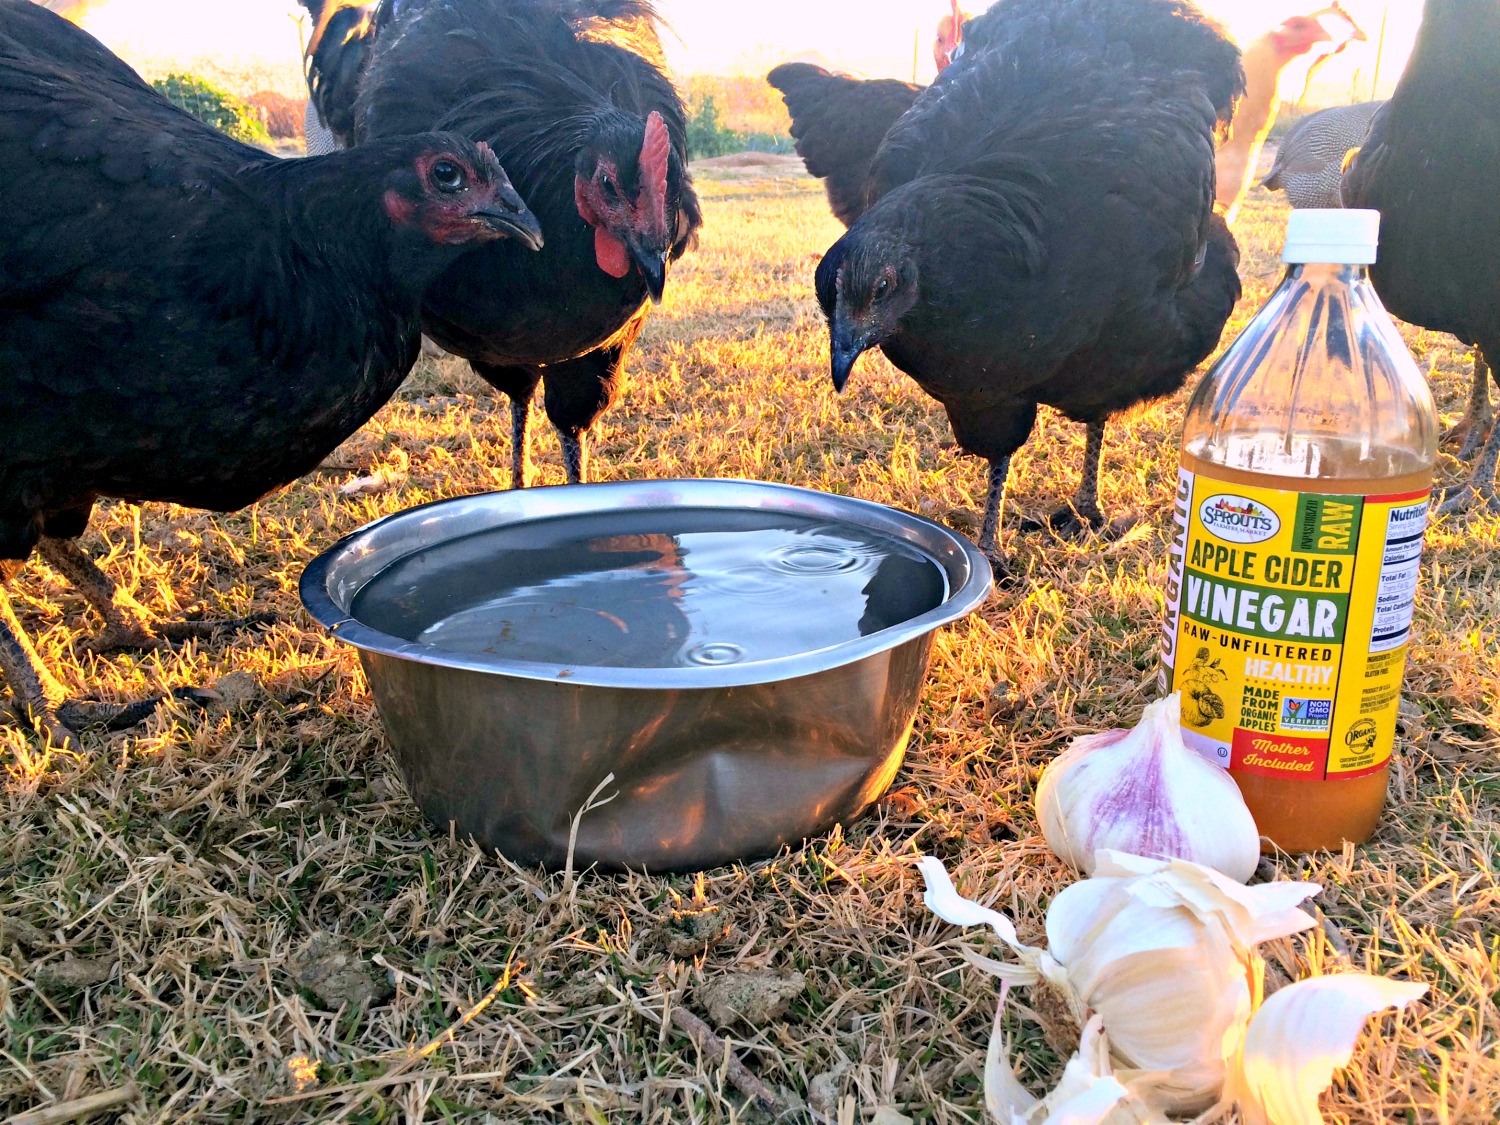 Improve your backyard chicken health, by feeding your hens garlic & apple cider vinegar. It’s great for their health. And I’ll show you how easy it is to start feeding it to your hens today.